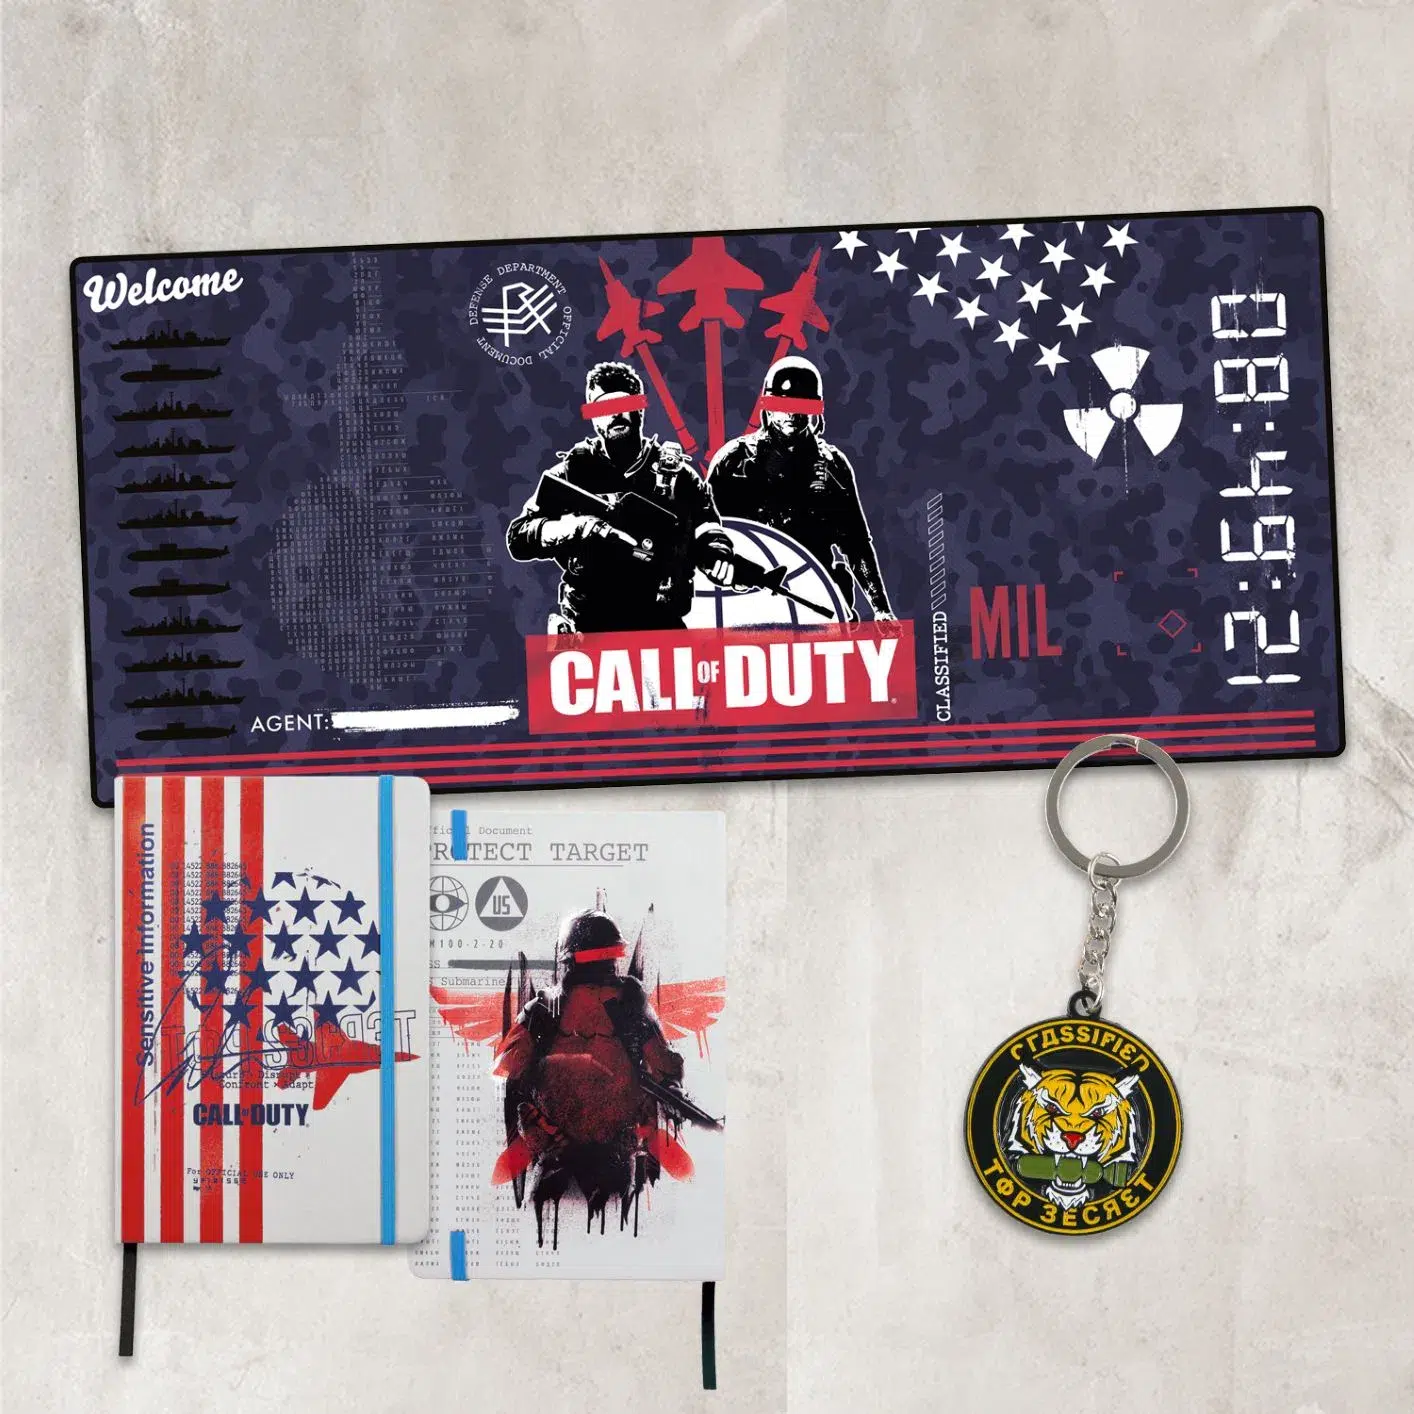 Call of Duty Cold War Fanpack